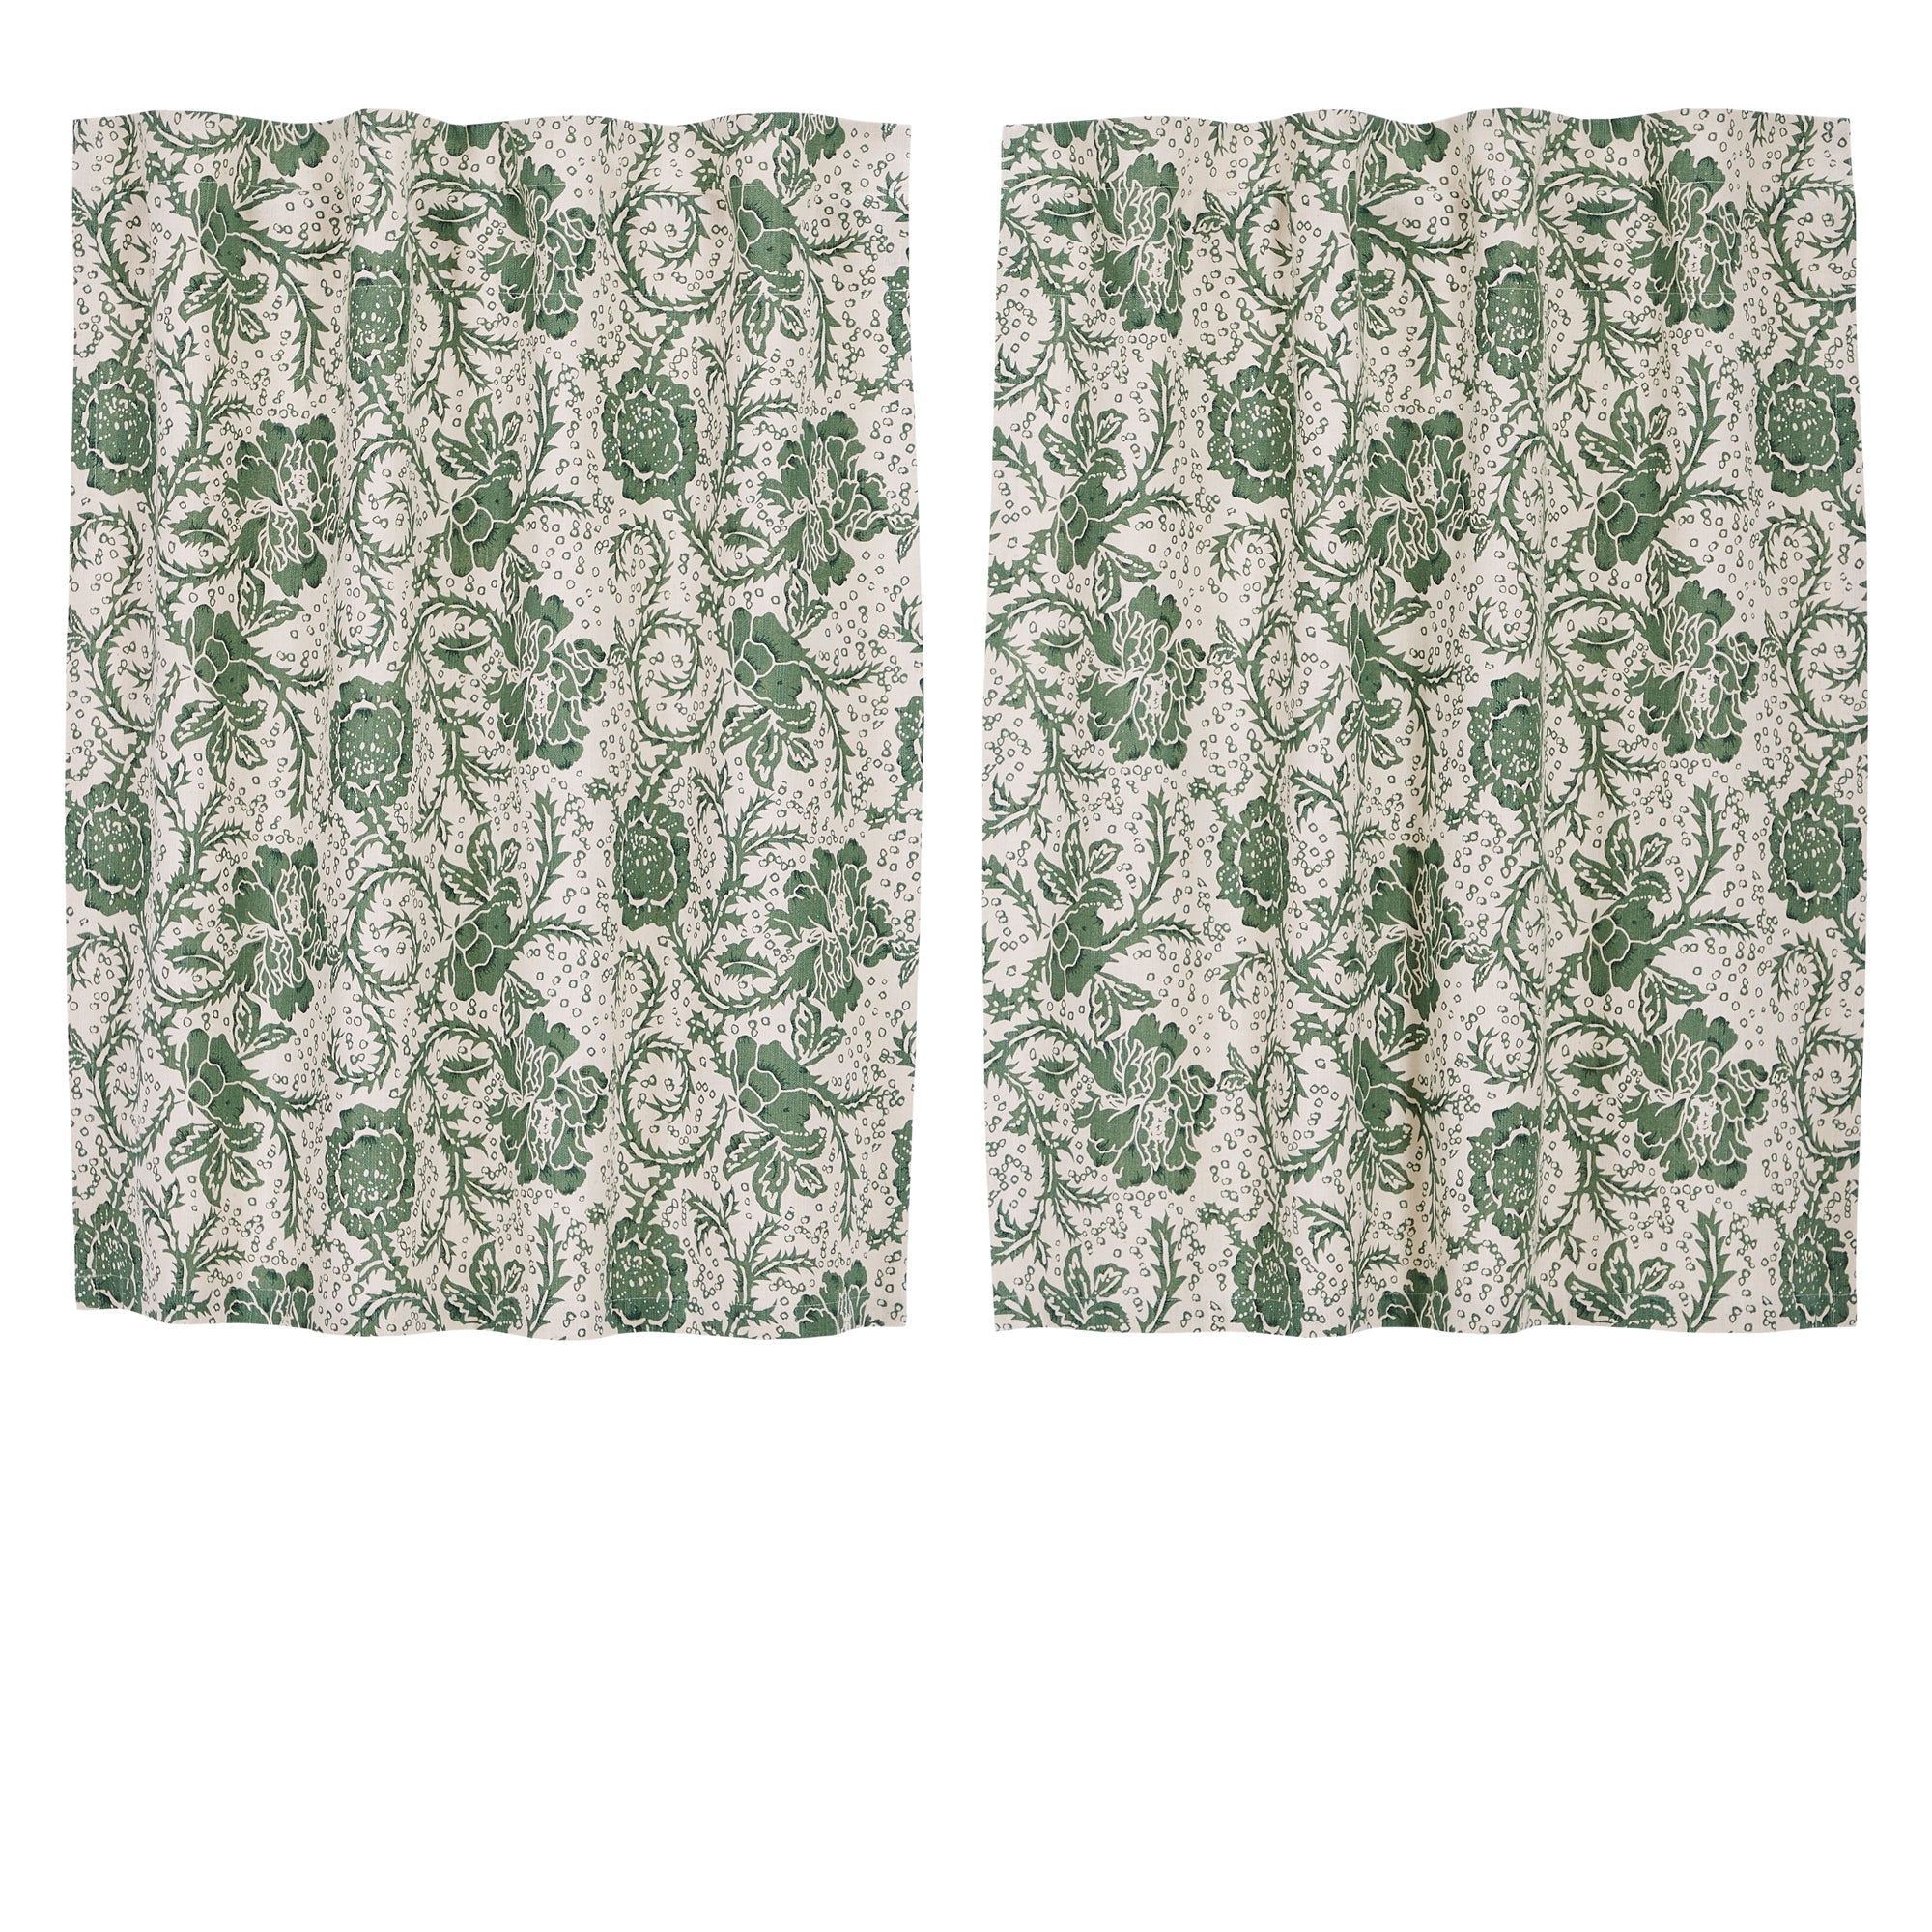 Dorset Green Floral Tier Curtain Set of 2 L36xW36 VHC Brands